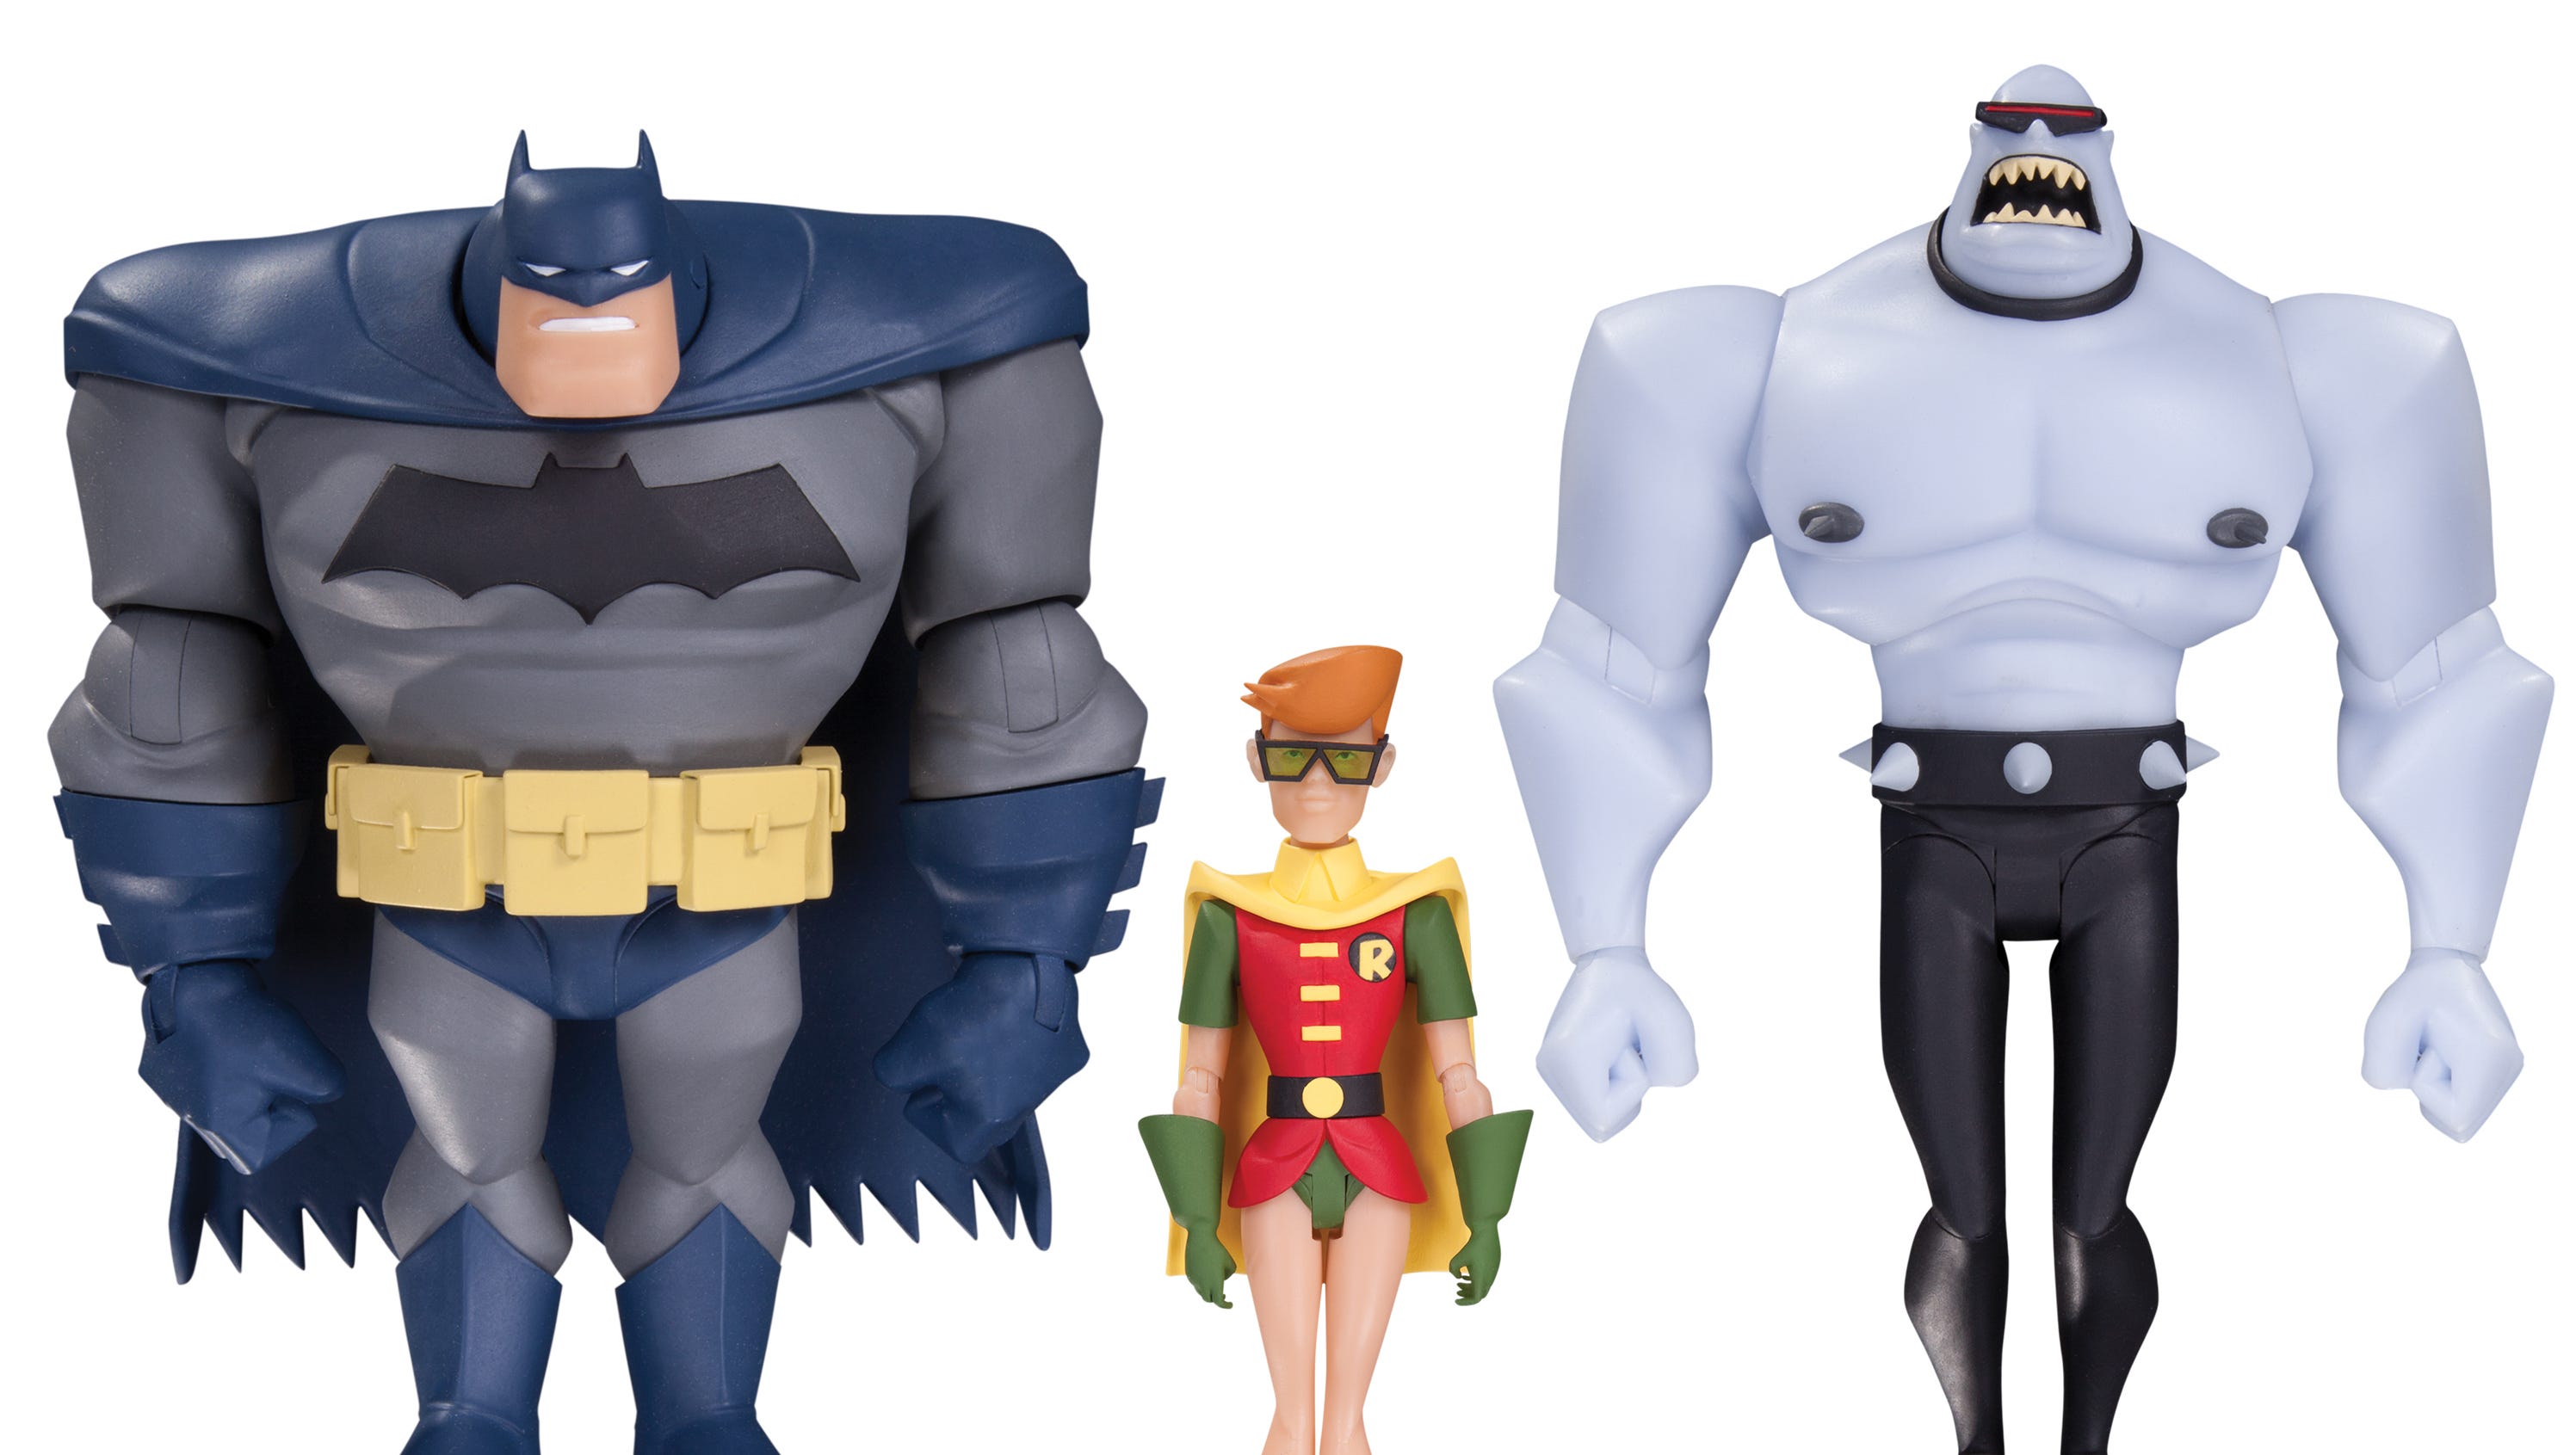 Exclusive: Batman animated toy line expands in 2016 and '17